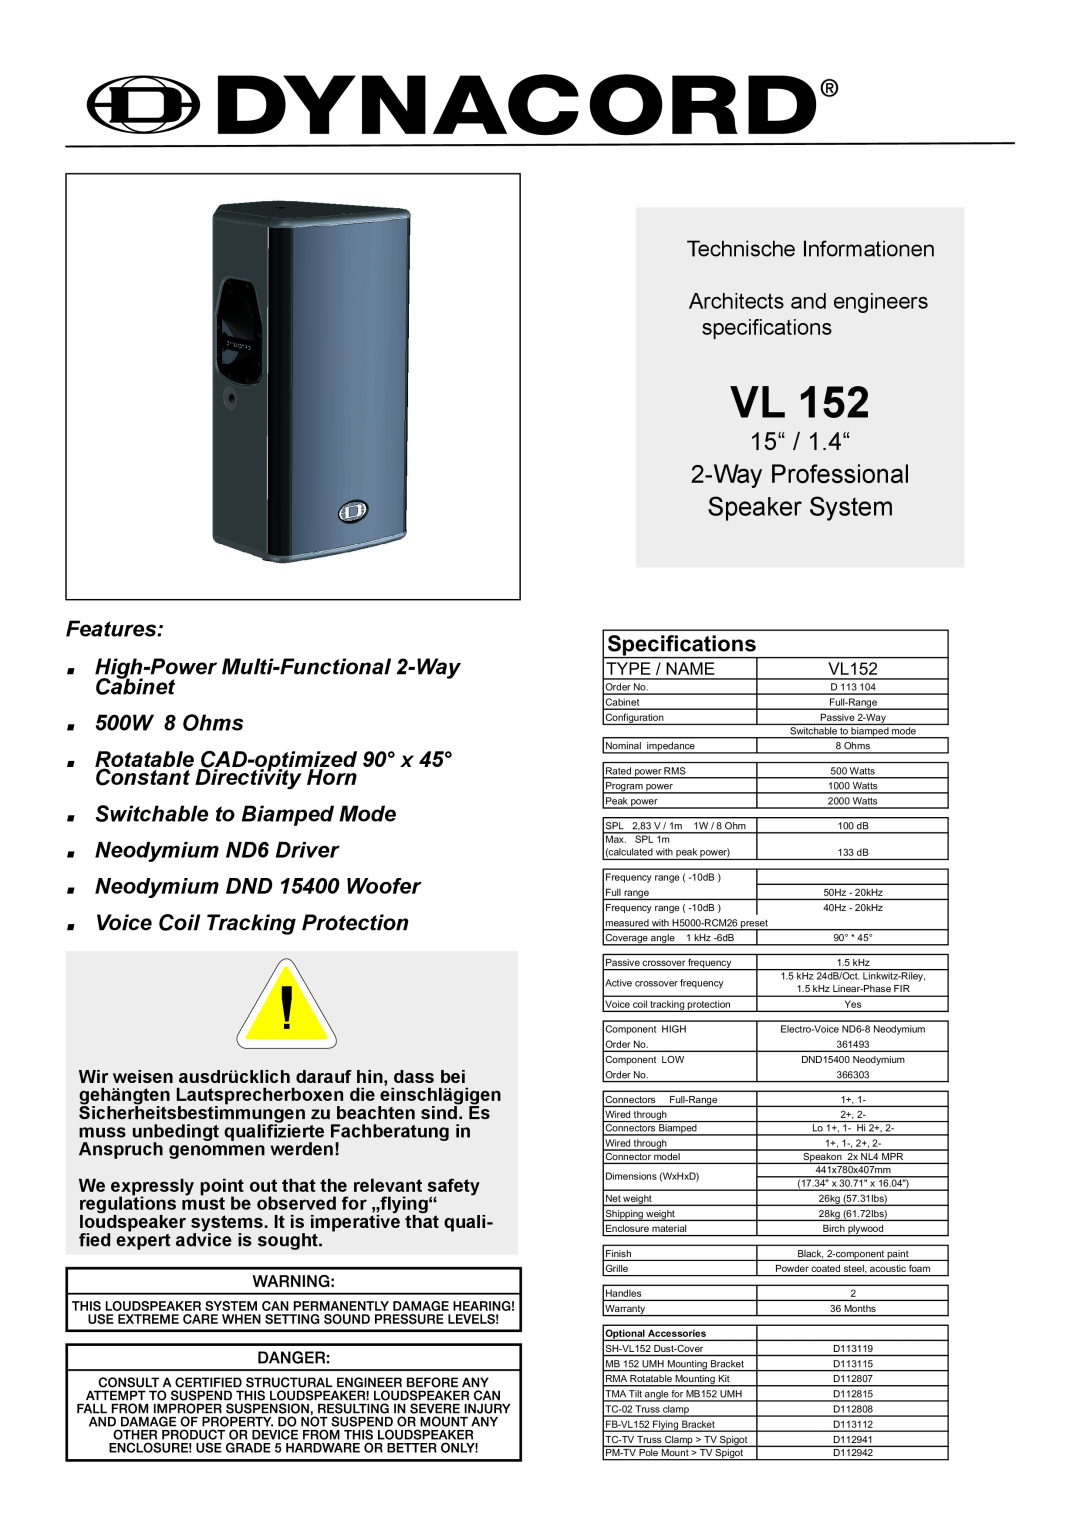 Dynacord VL 152 specifications Specifications, 15“ / 1.4“ 2-WayProfessional Speaker System, 500W 8 Ohms 